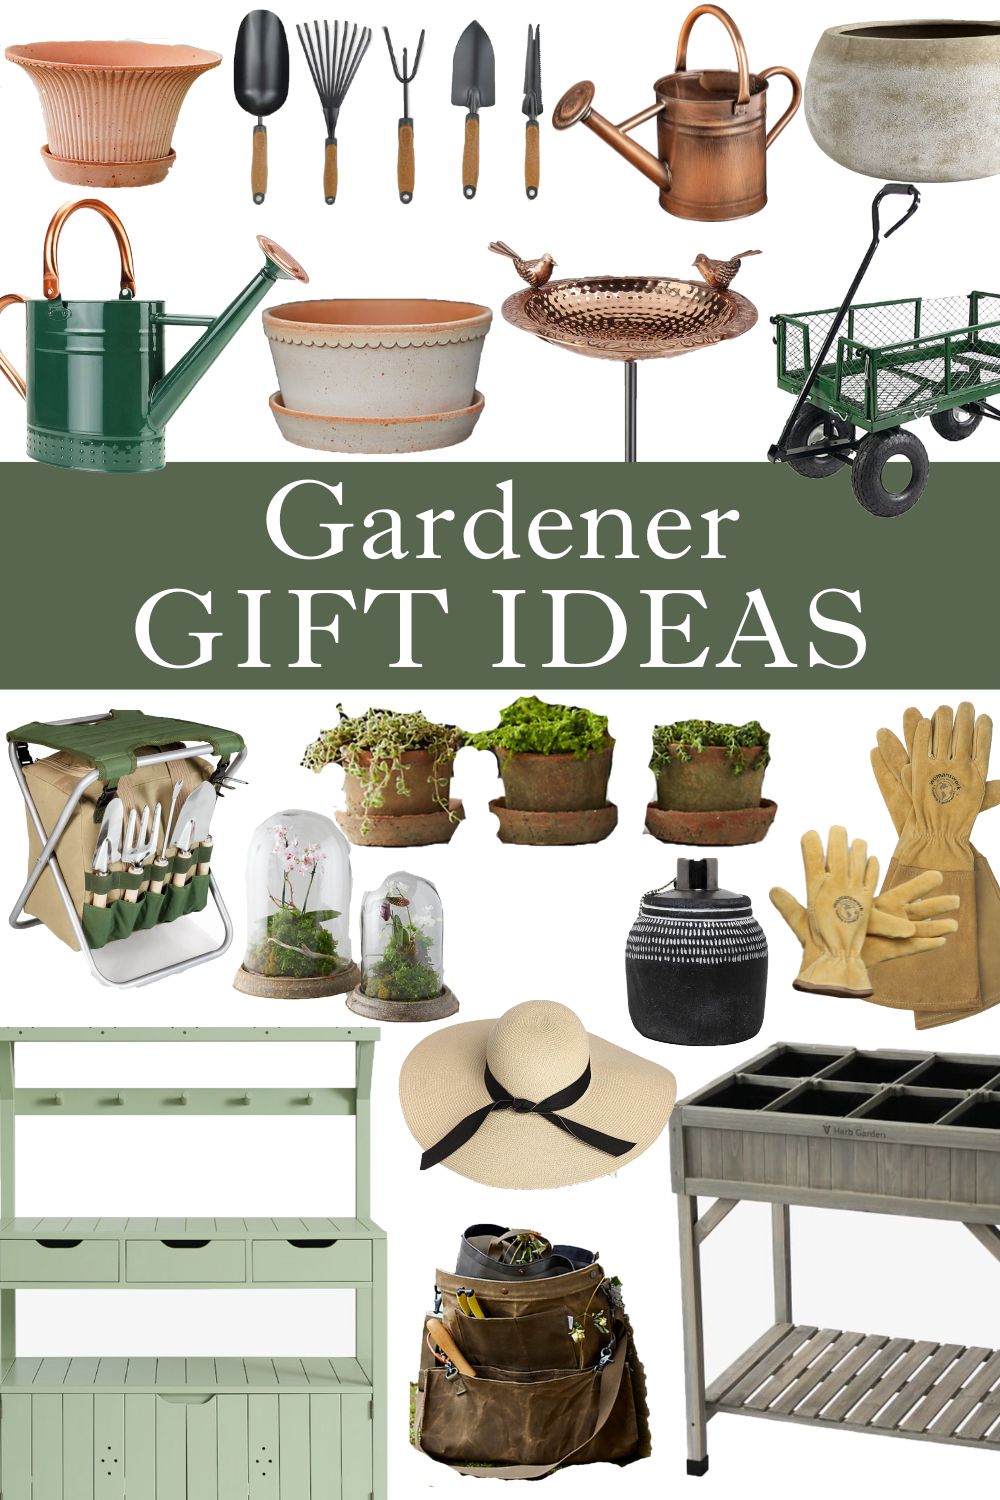 Gifts for a garden lover